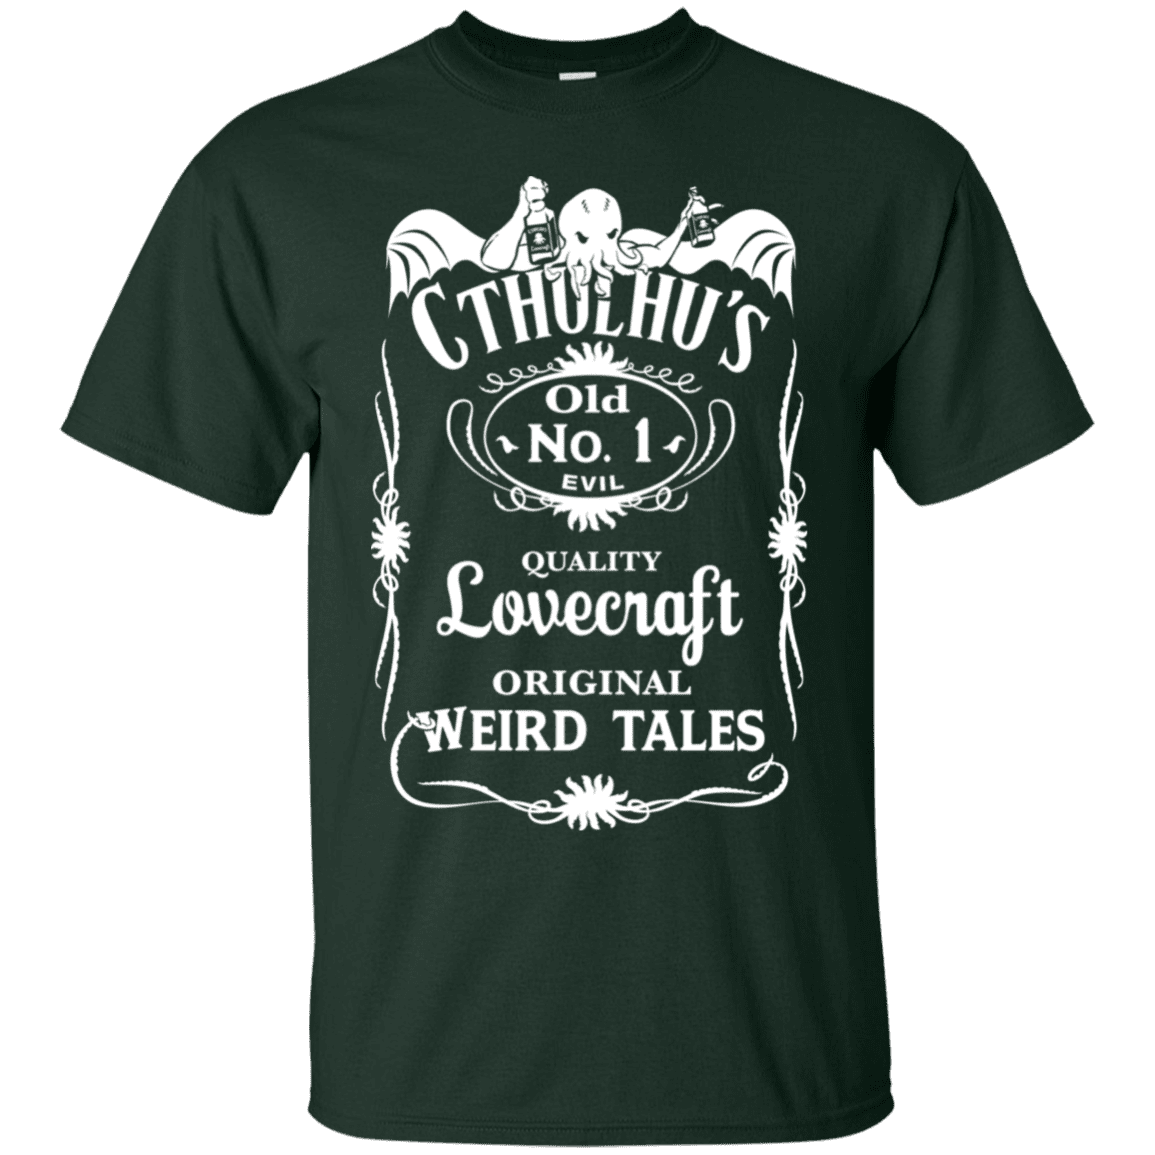 T-Shirts Forest / S Cthulhu's T-Shirt